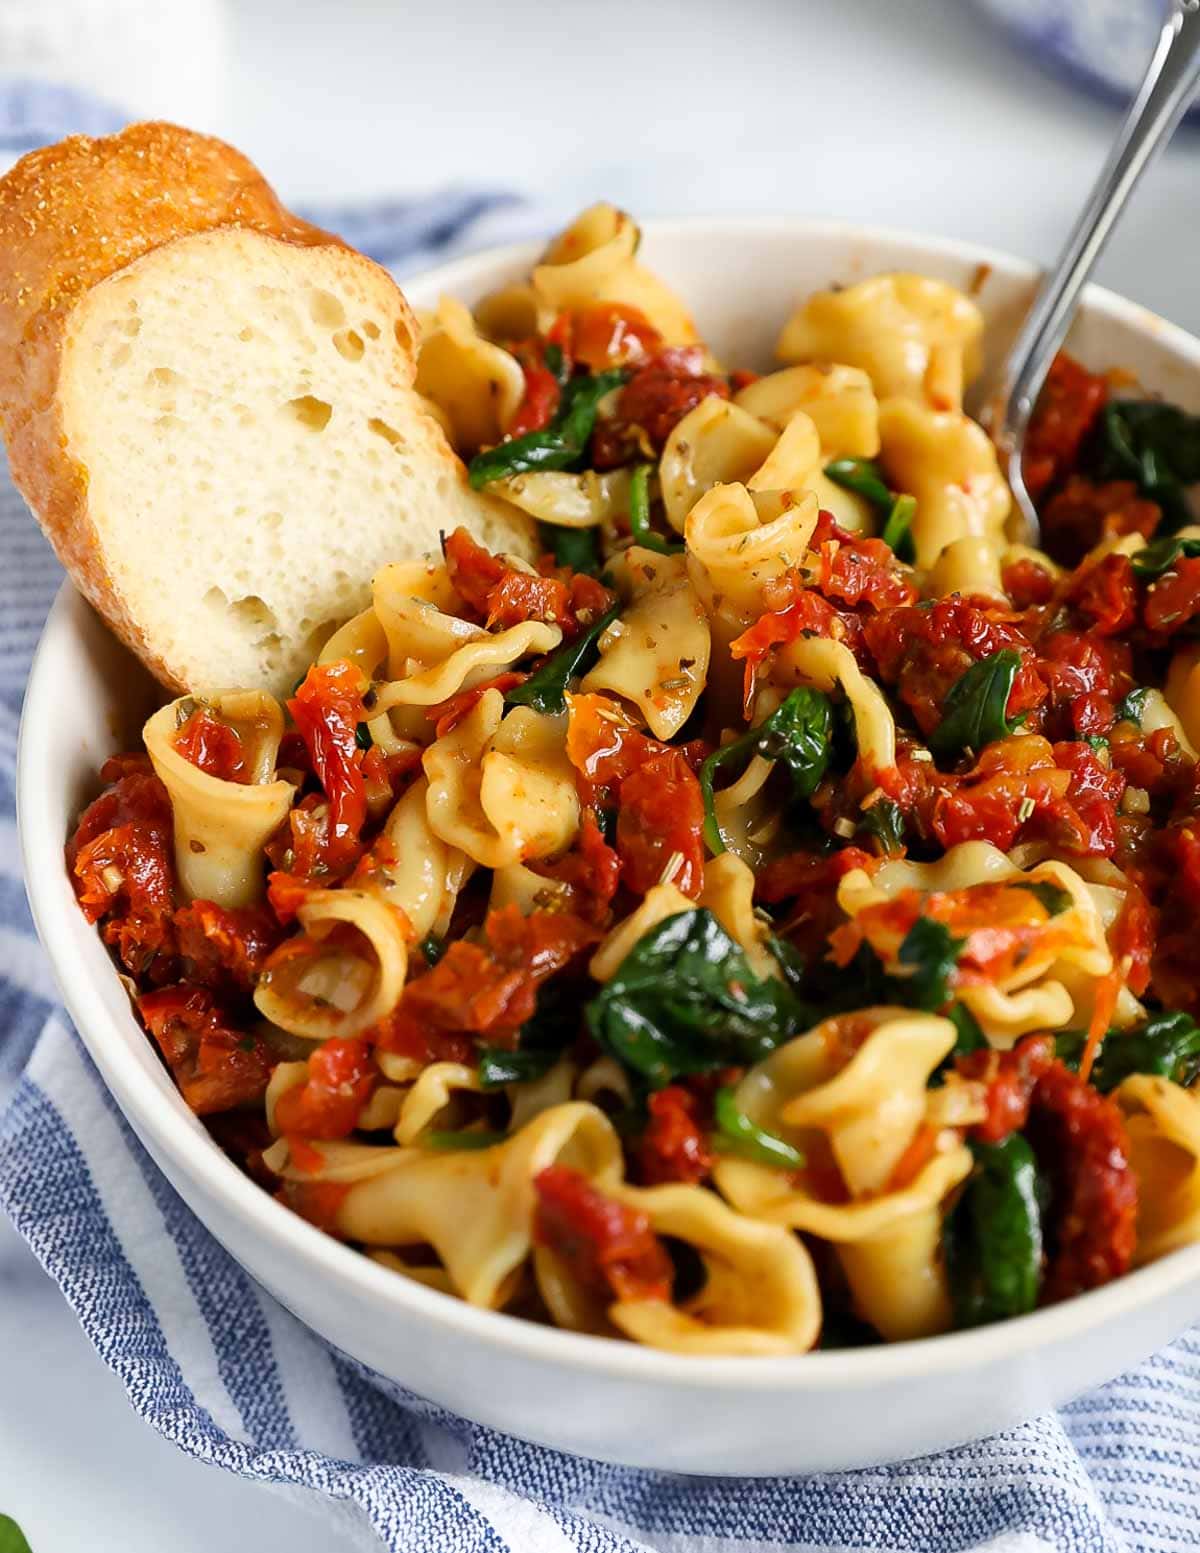 A fork placed inside a white bowl that is filled with pasta, tomatoes, and spinach. There is also a sliced of bread inside the bowl.